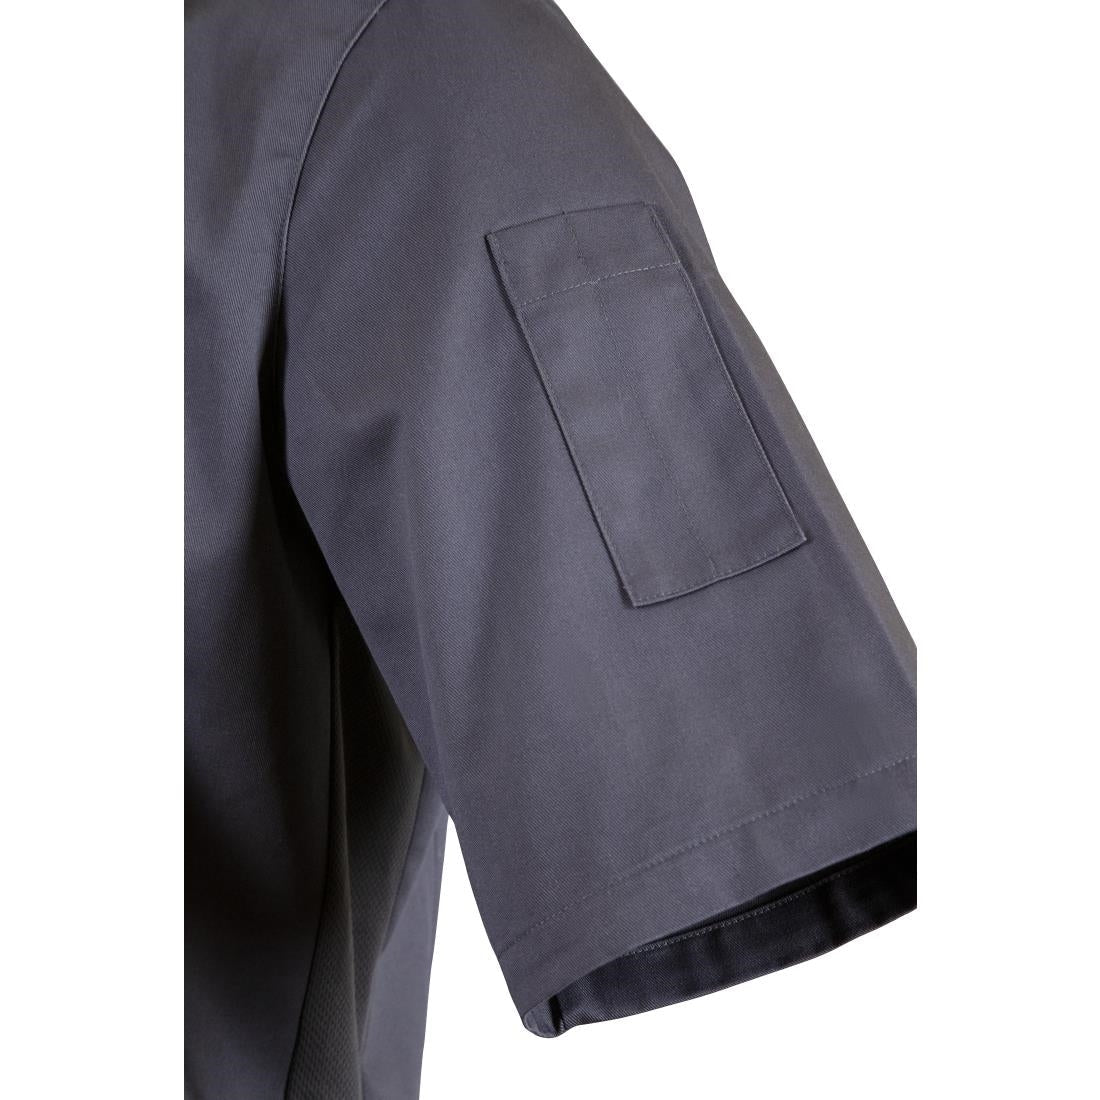 BB712-S Southside Band Collar Chefs Jacket Charcoal Size S JD Catering Equipment Solutions Ltd